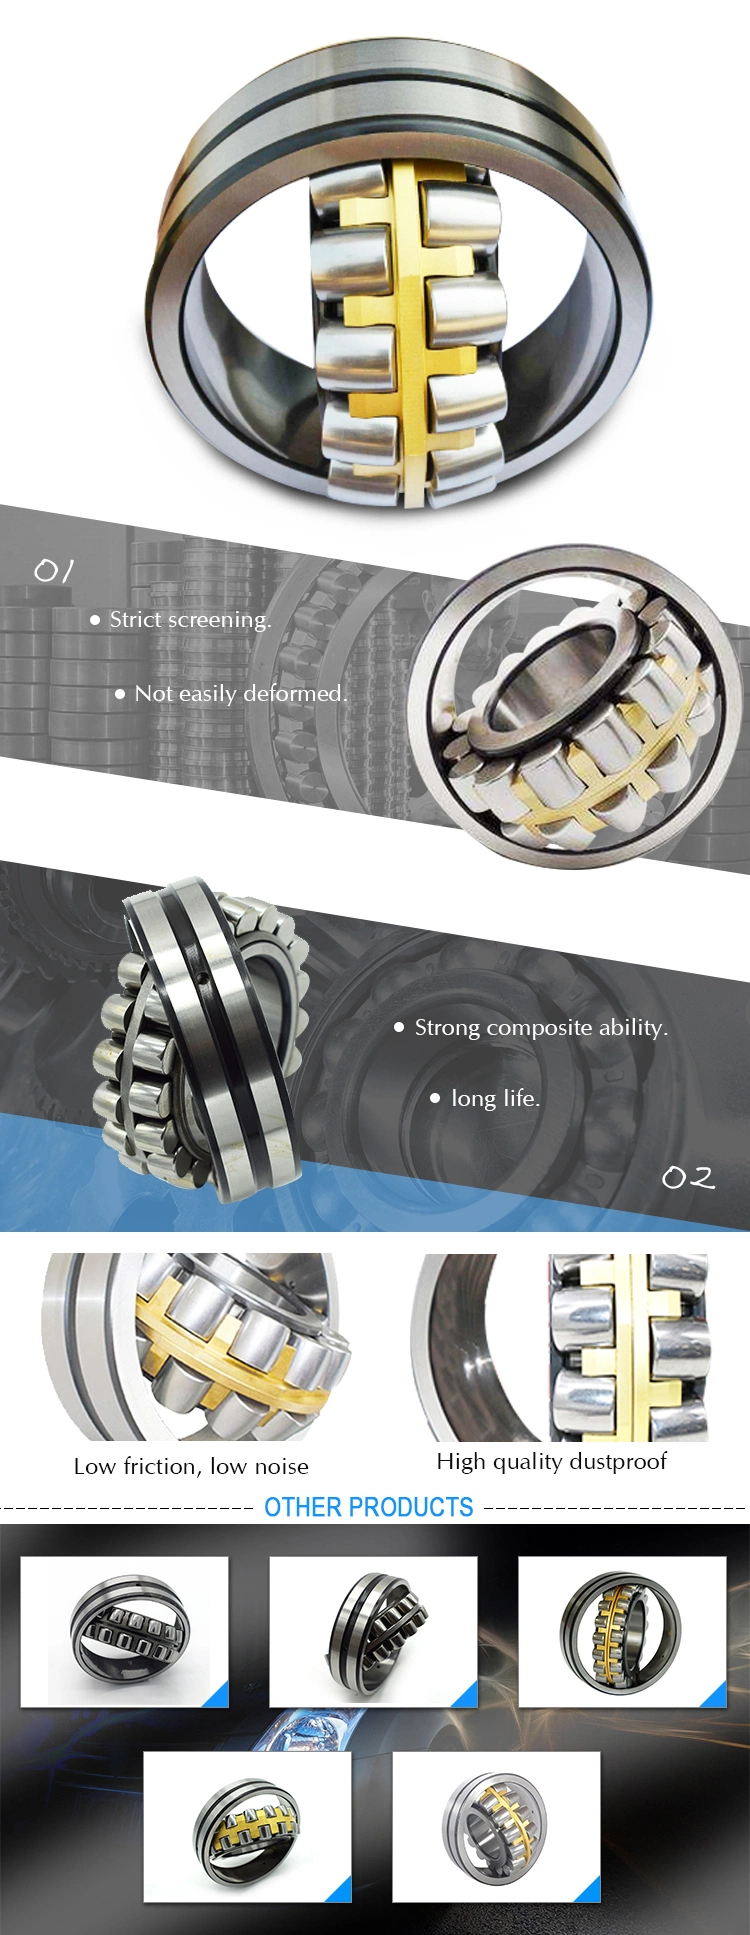 24124 Cc/W33 Spherical Roller Bearing with Cylindrical Bore